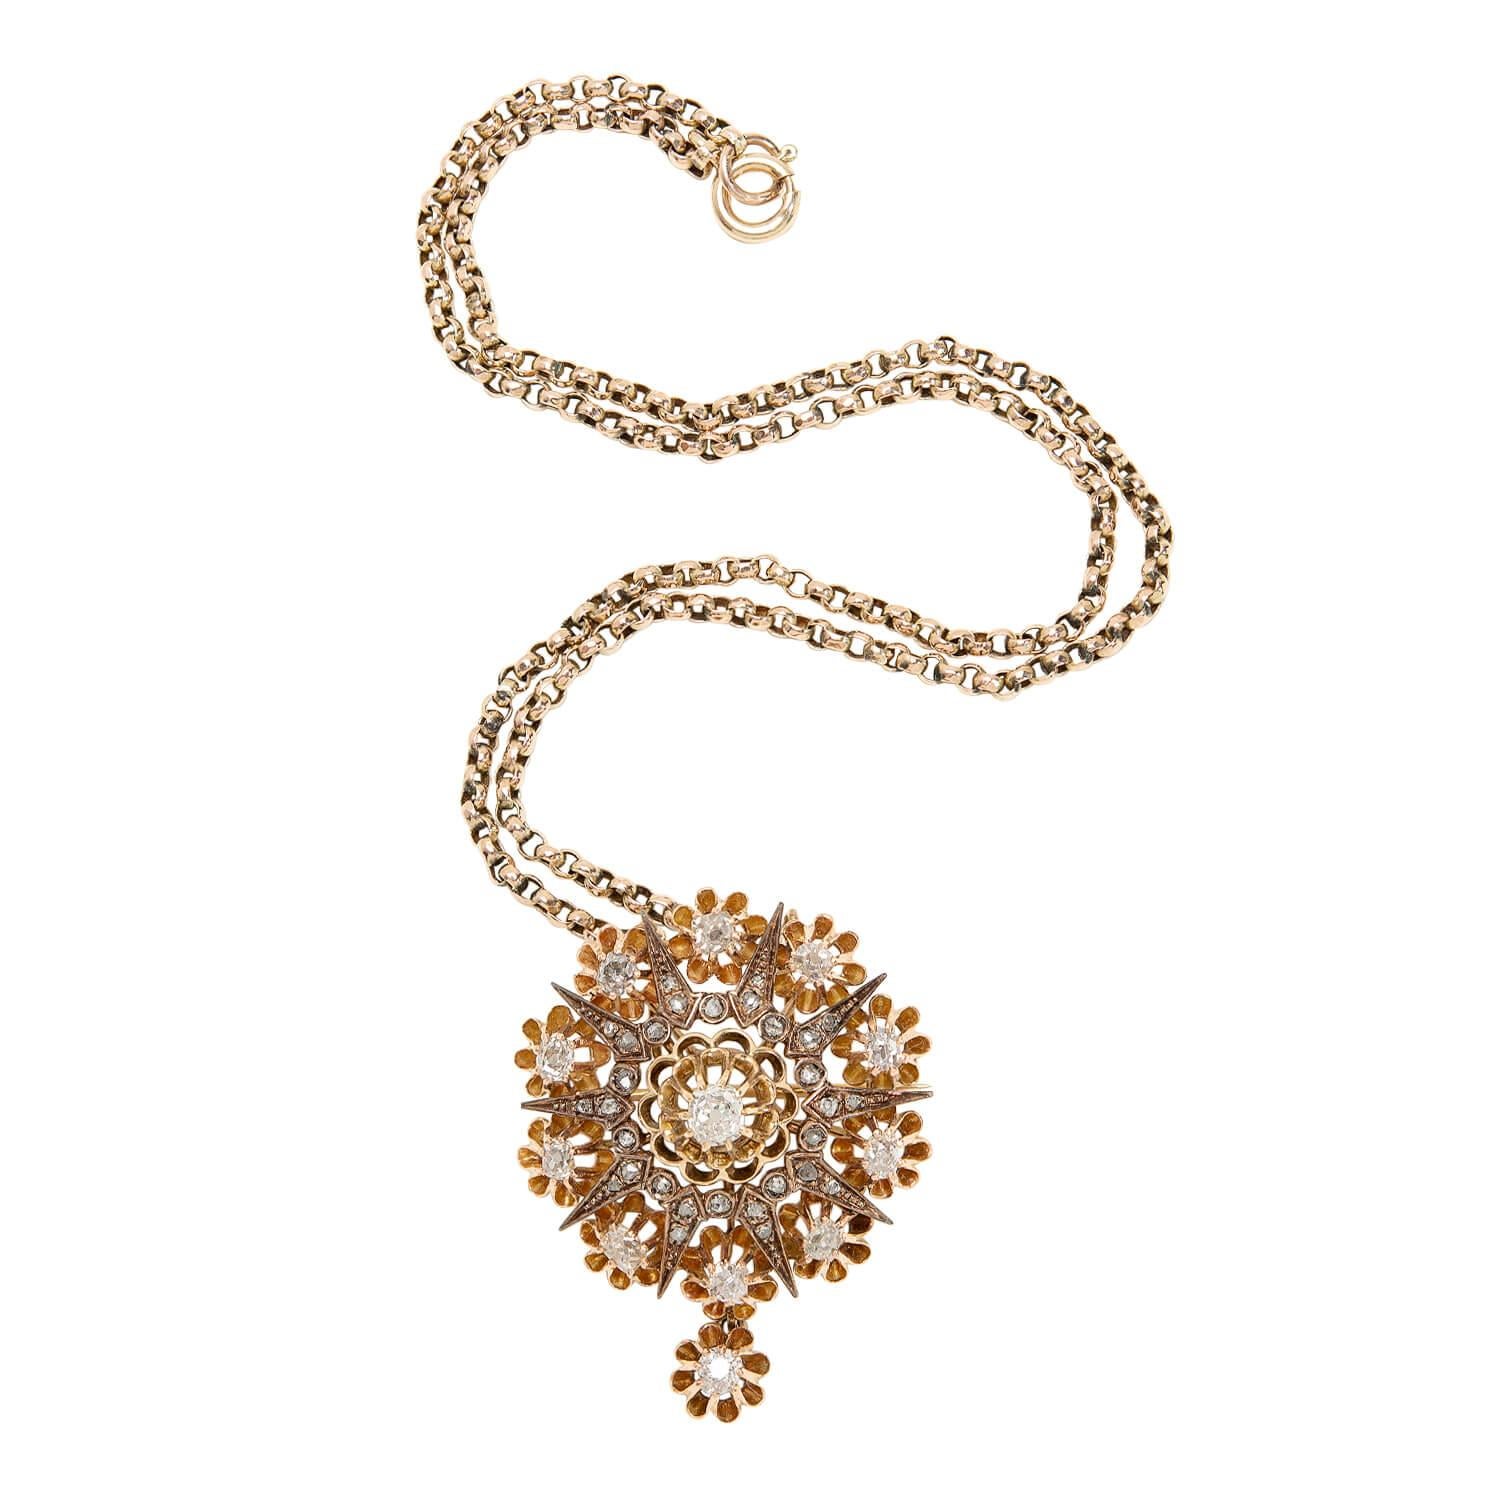 A gorgeous diamond starburst pendant pin from the Victorian (ca1880) era! Crafted in 15kt yellow gold and topped in sterling silver, this beautiful piece is comprised of 10 Old Mine Cut diamonds that surround a single larger Old Mine Cut center